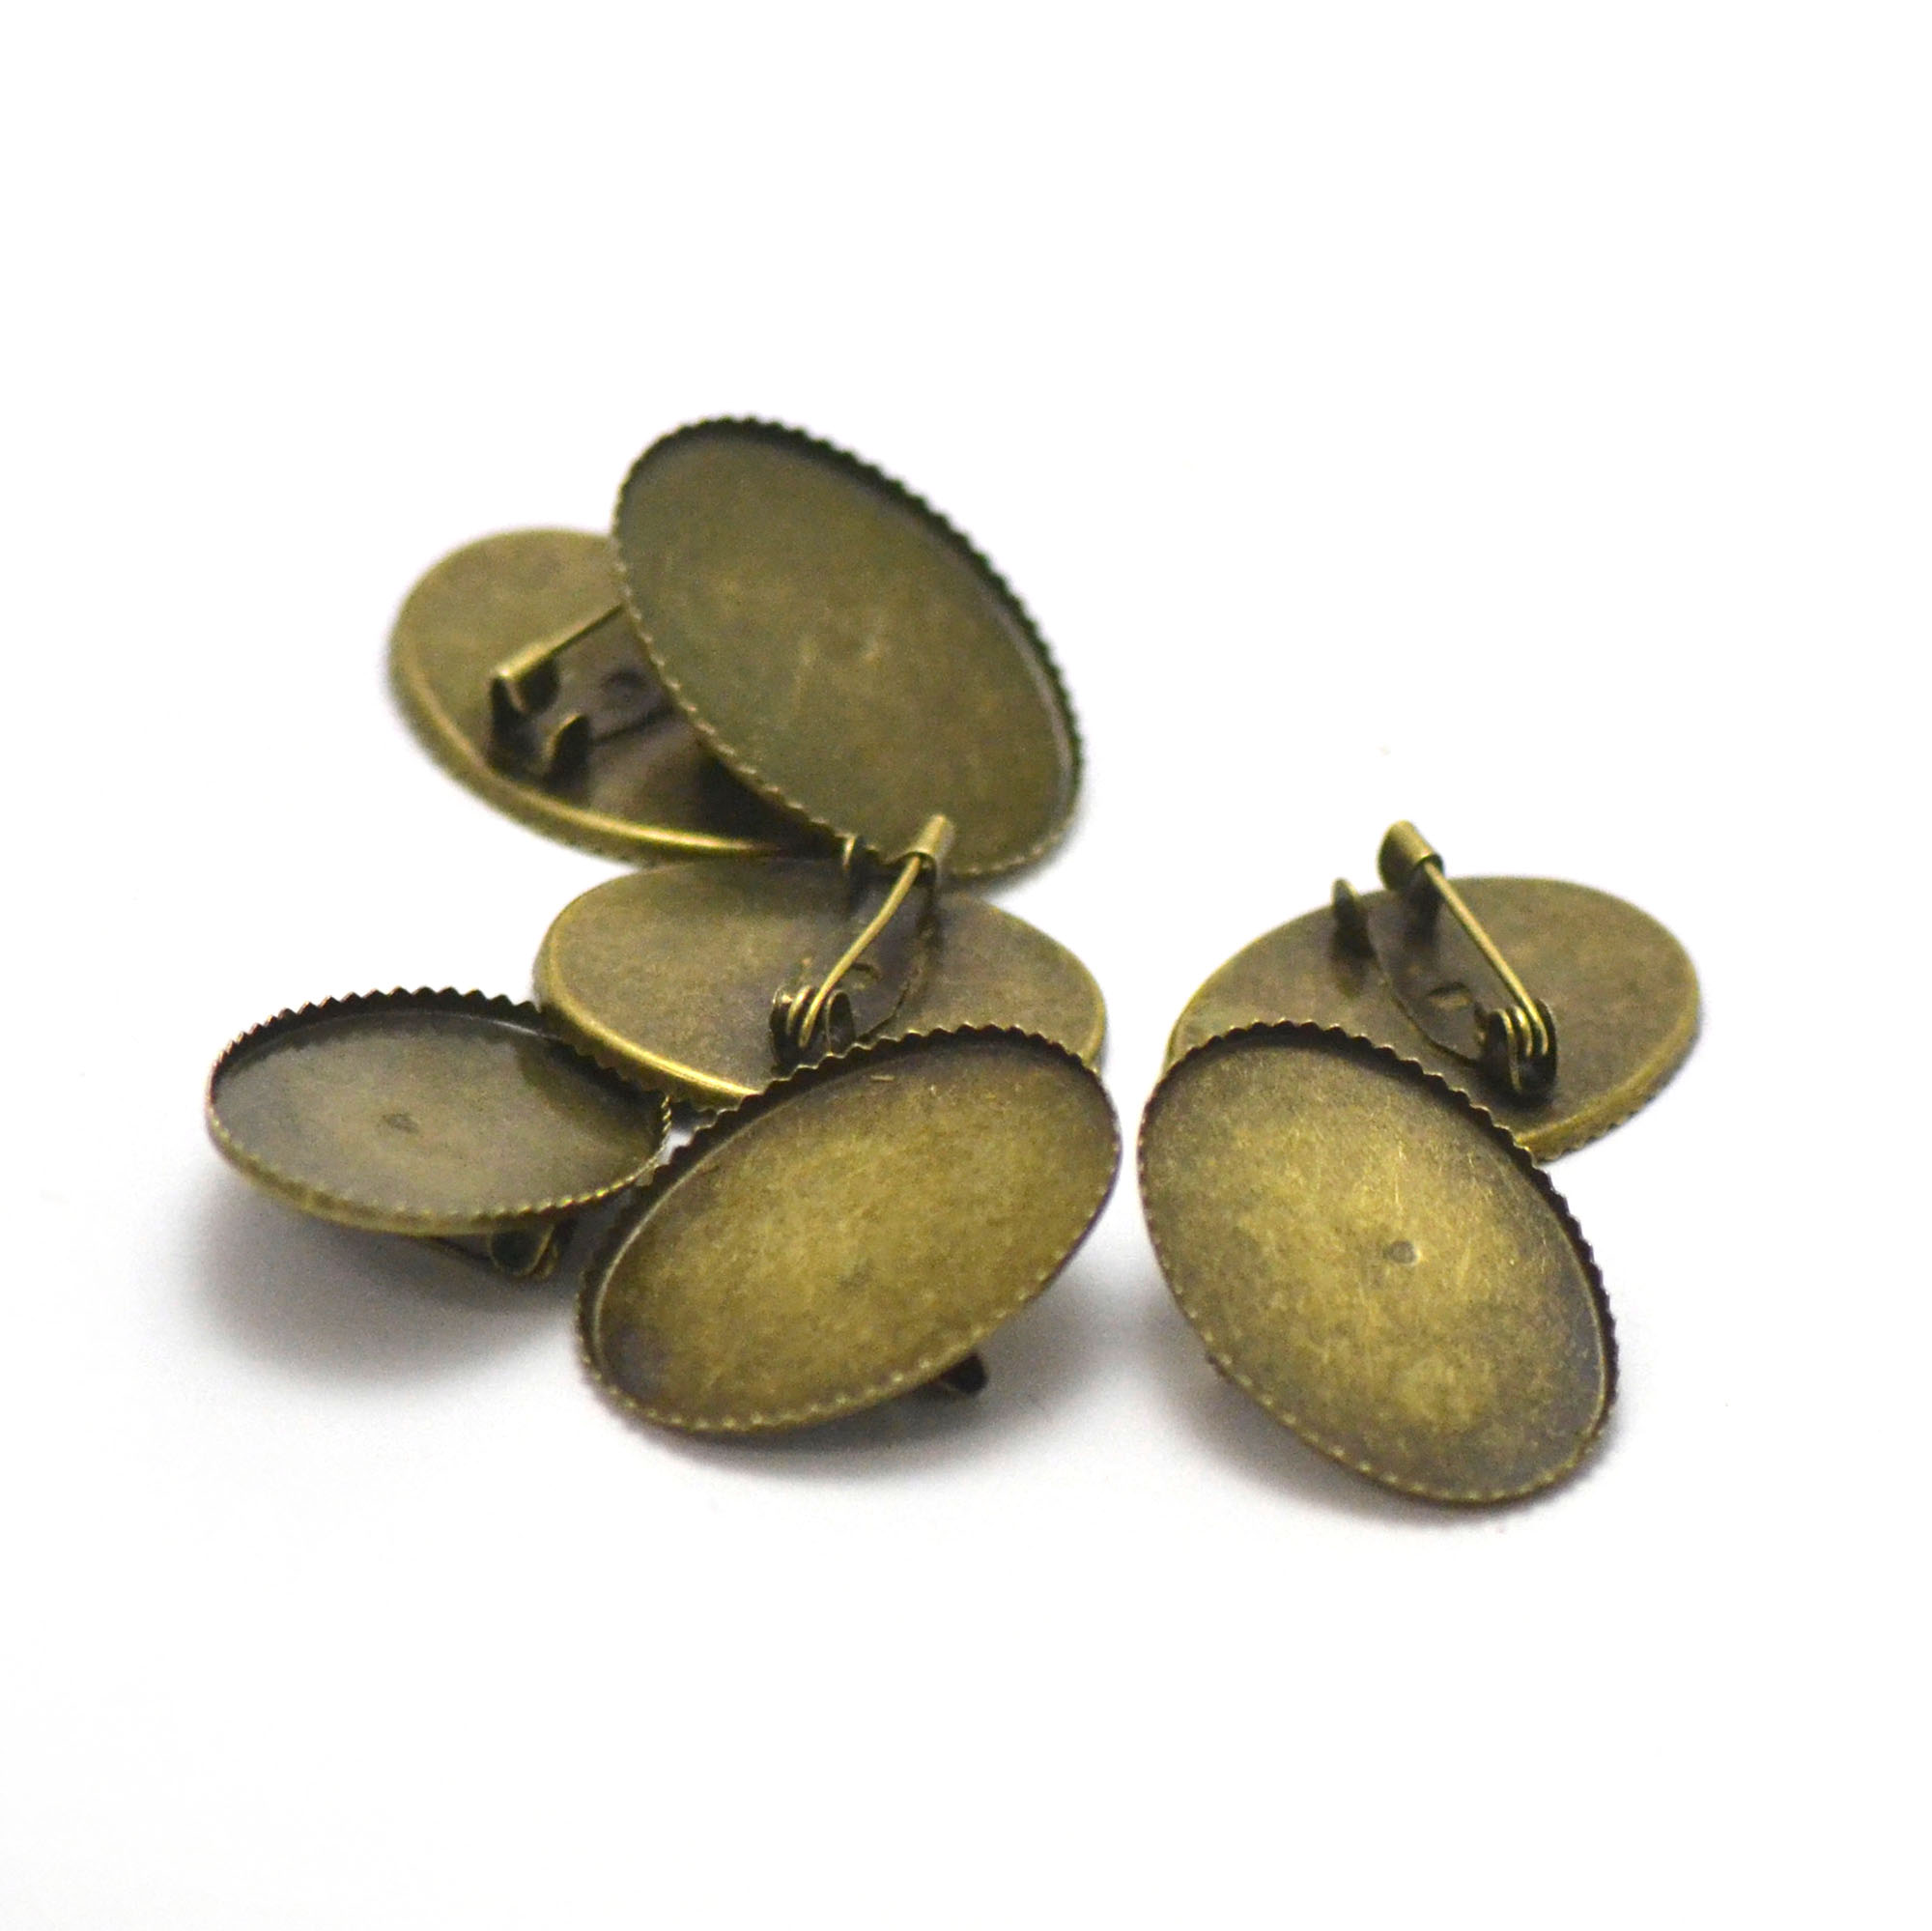 10 broches supports cabochon ovale 25x18 mmdent, bronze